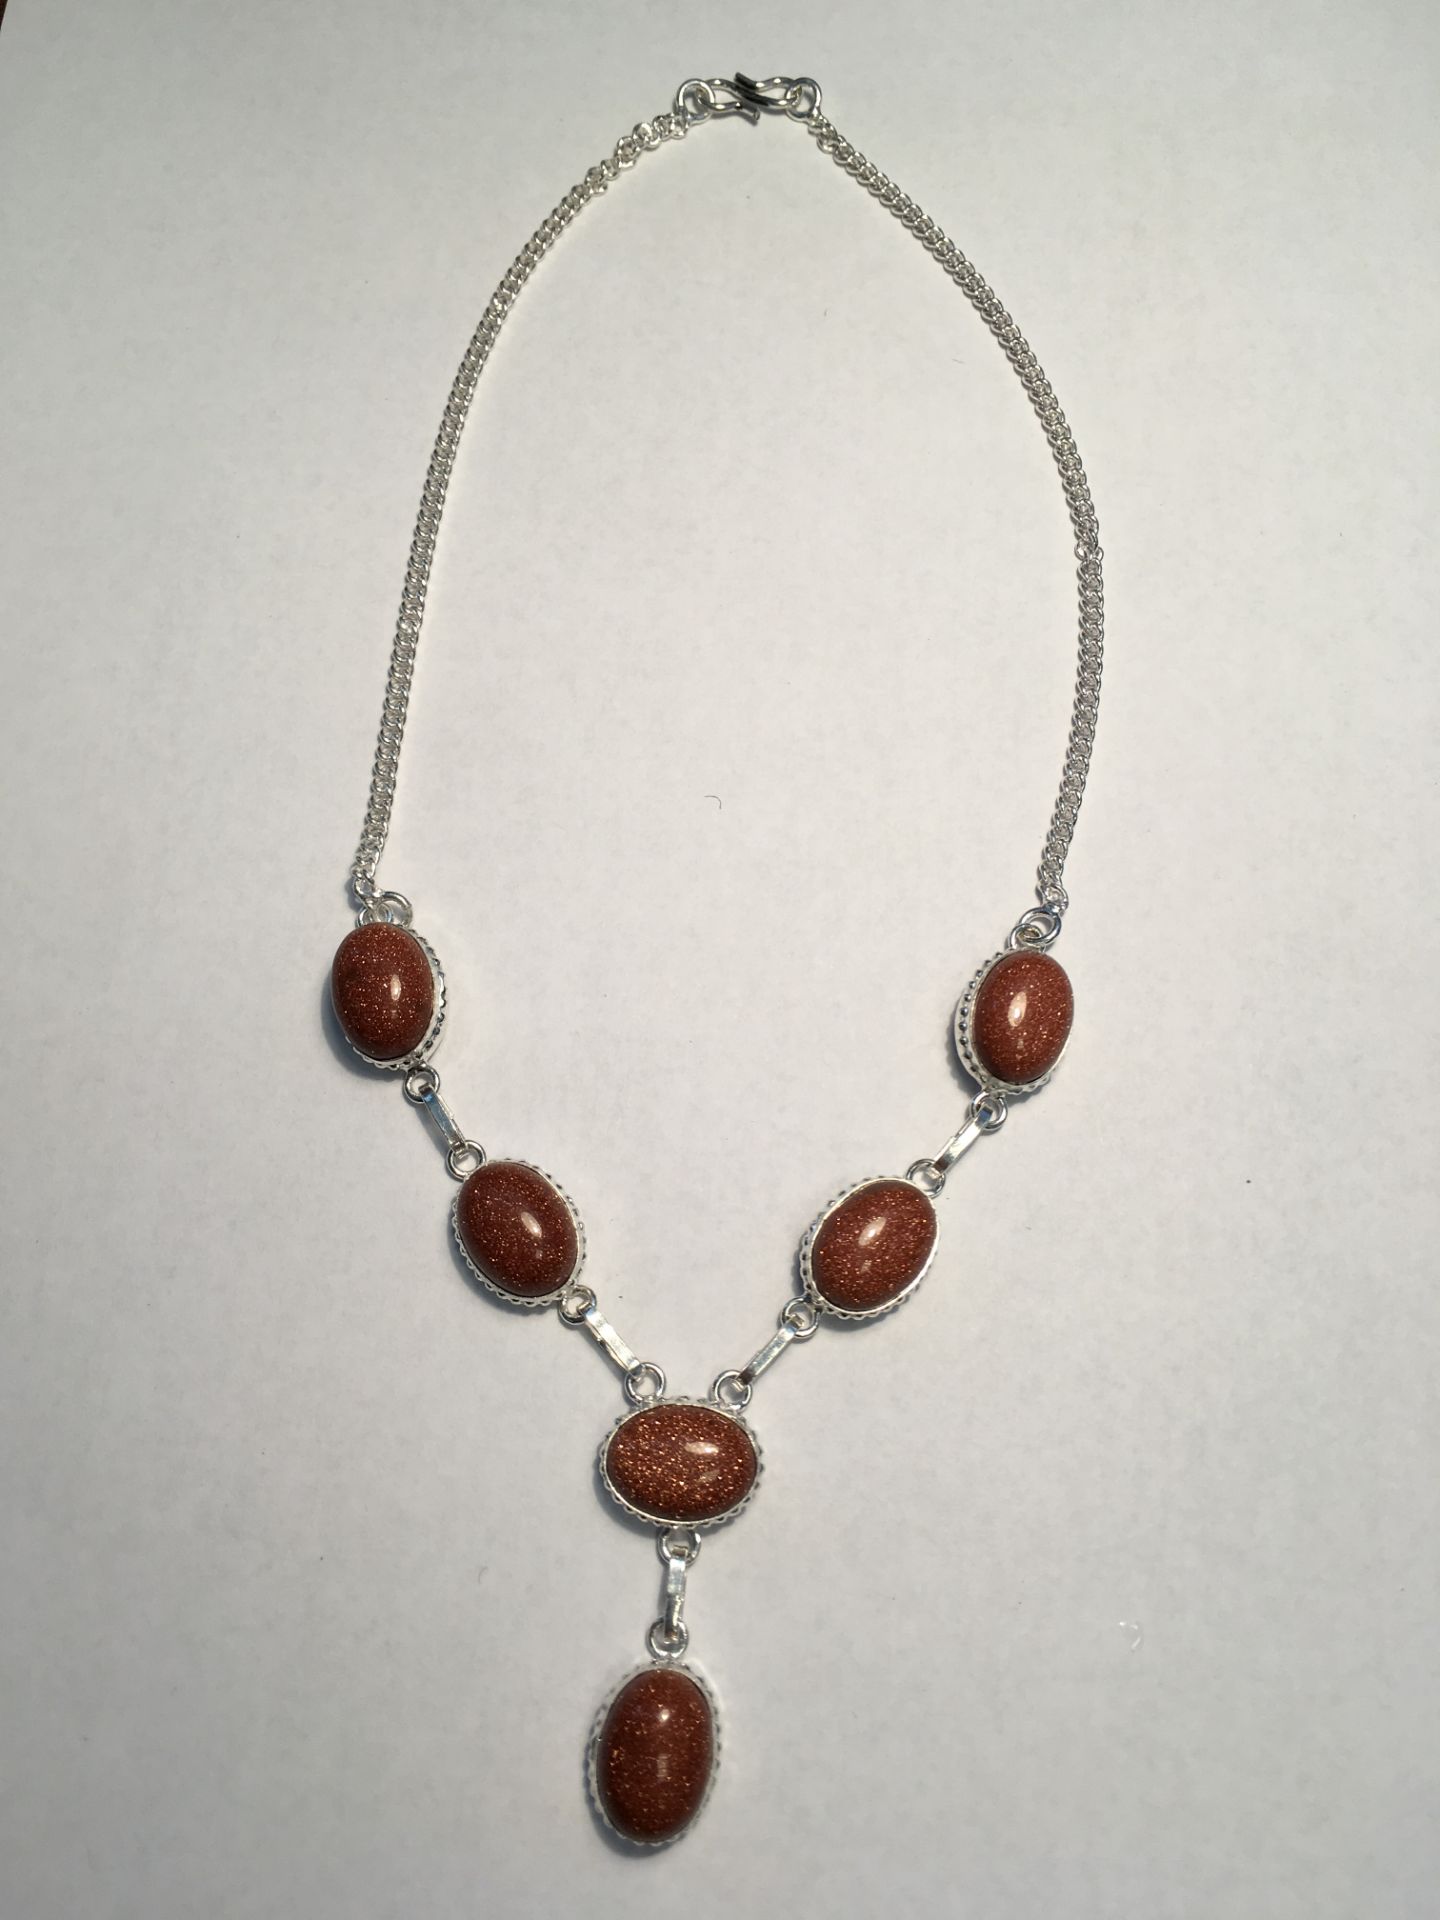 Goldstone Gems .925 Silver Jewellery Necklace 17 Inches